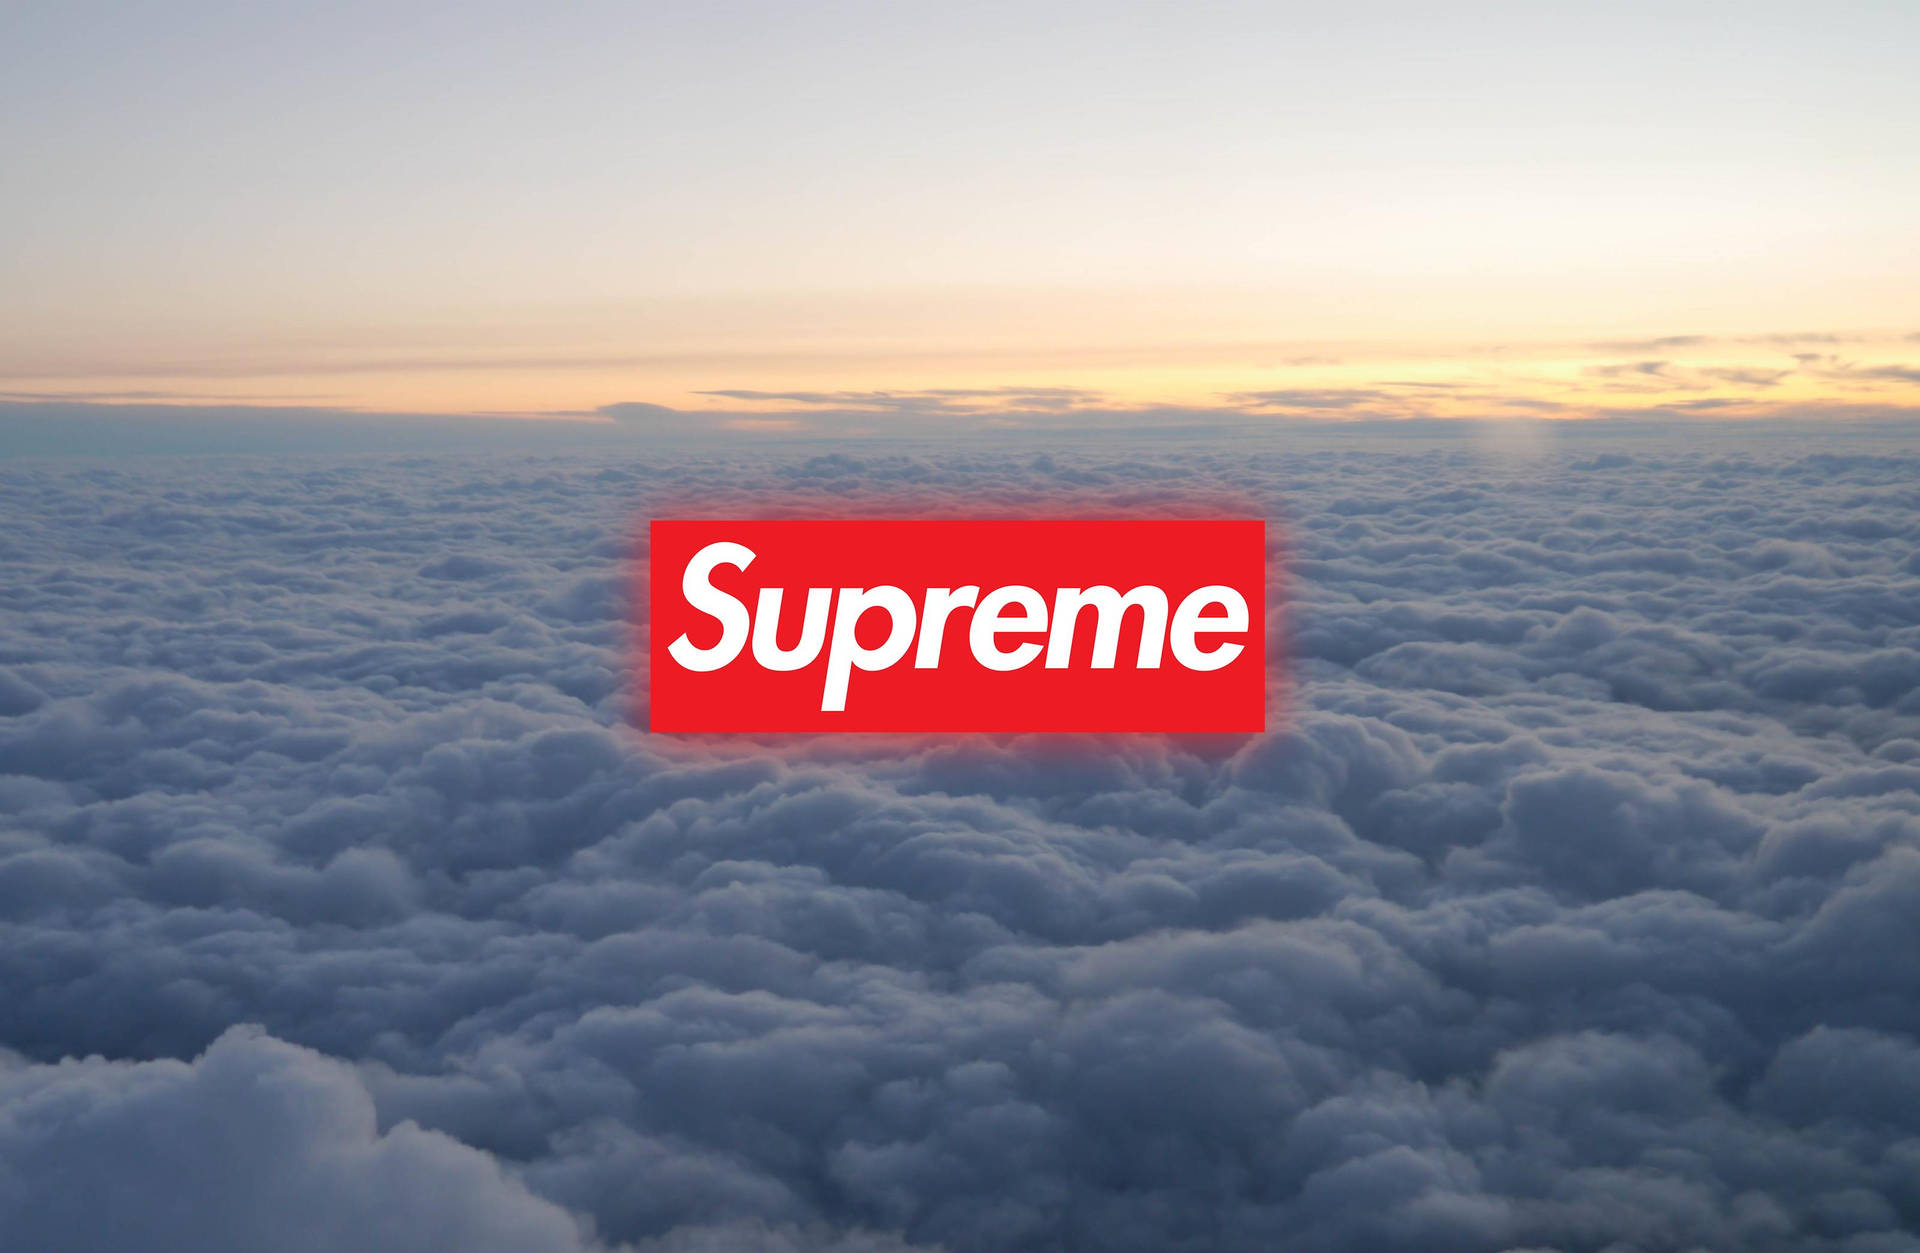 Supreme 3200X2089 Wallpaper and Background Image